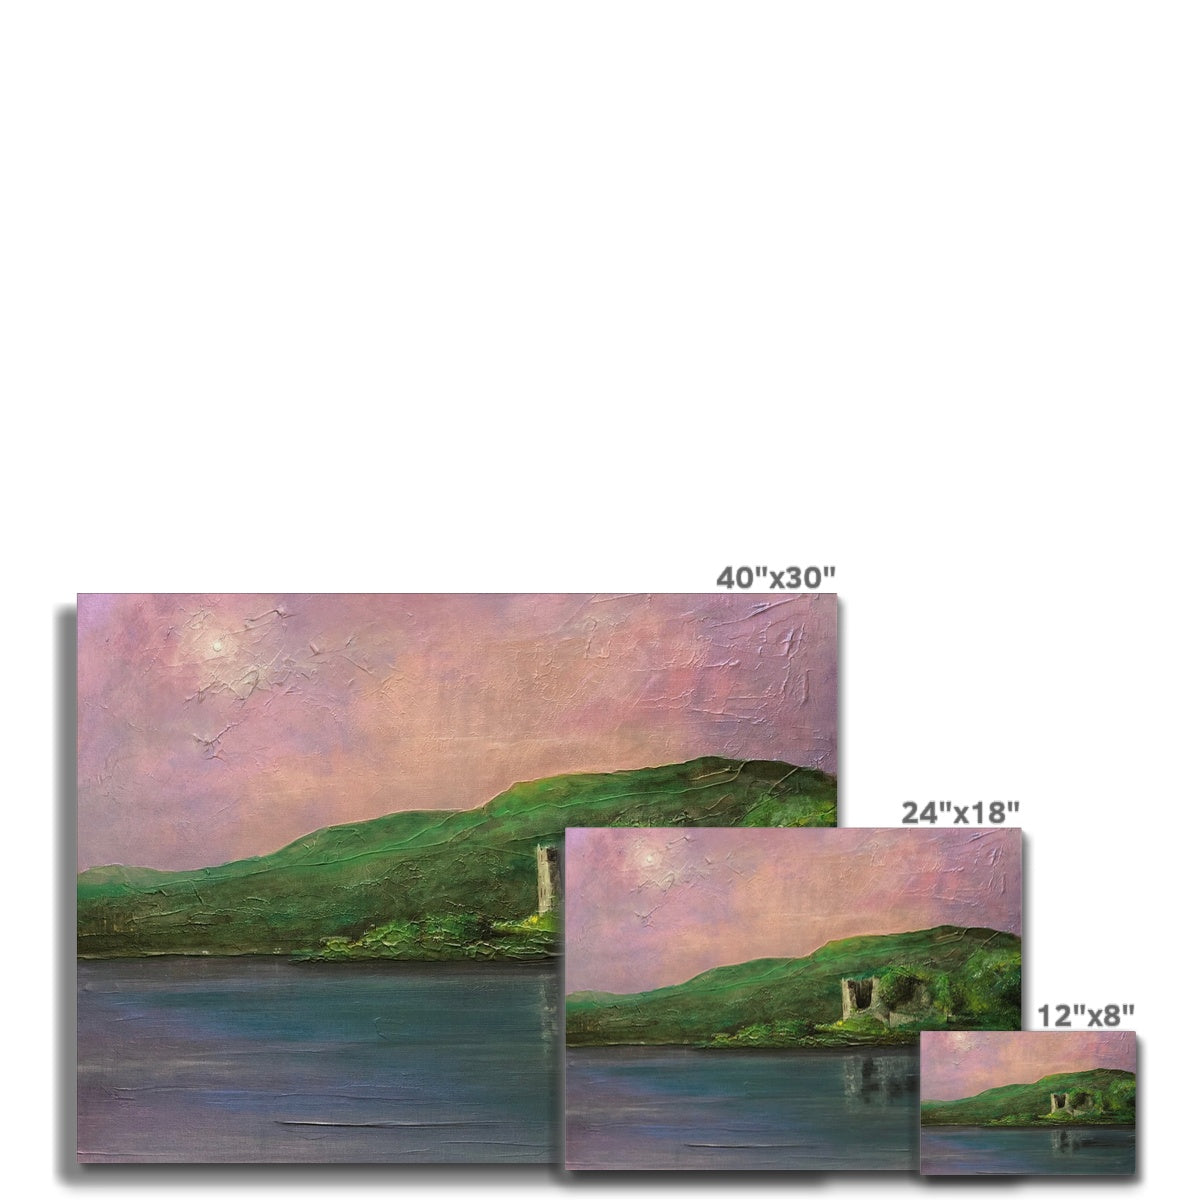 Old Castle Lachlan Painting | Canvas From Scotland-Contemporary Stretched Canvas Prints-Historic & Iconic Scotland Art Gallery-Paintings, Prints, Homeware, Art Gifts From Scotland By Scottish Artist Kevin Hunter